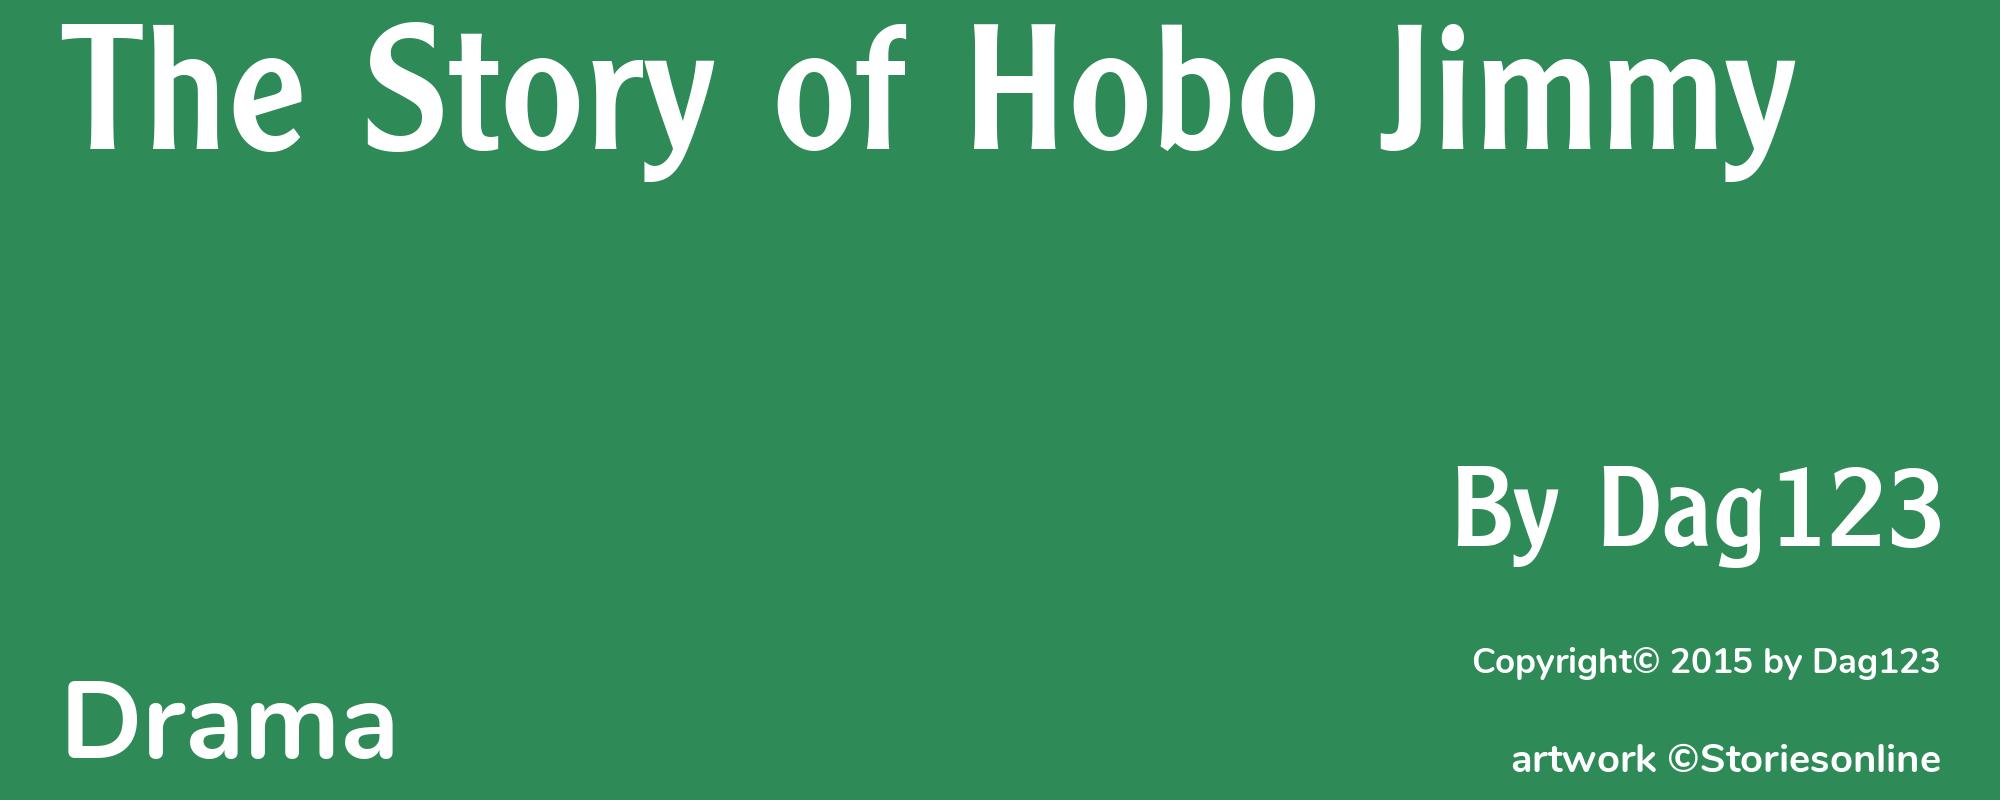 The Story of Hobo Jimmy - Cover